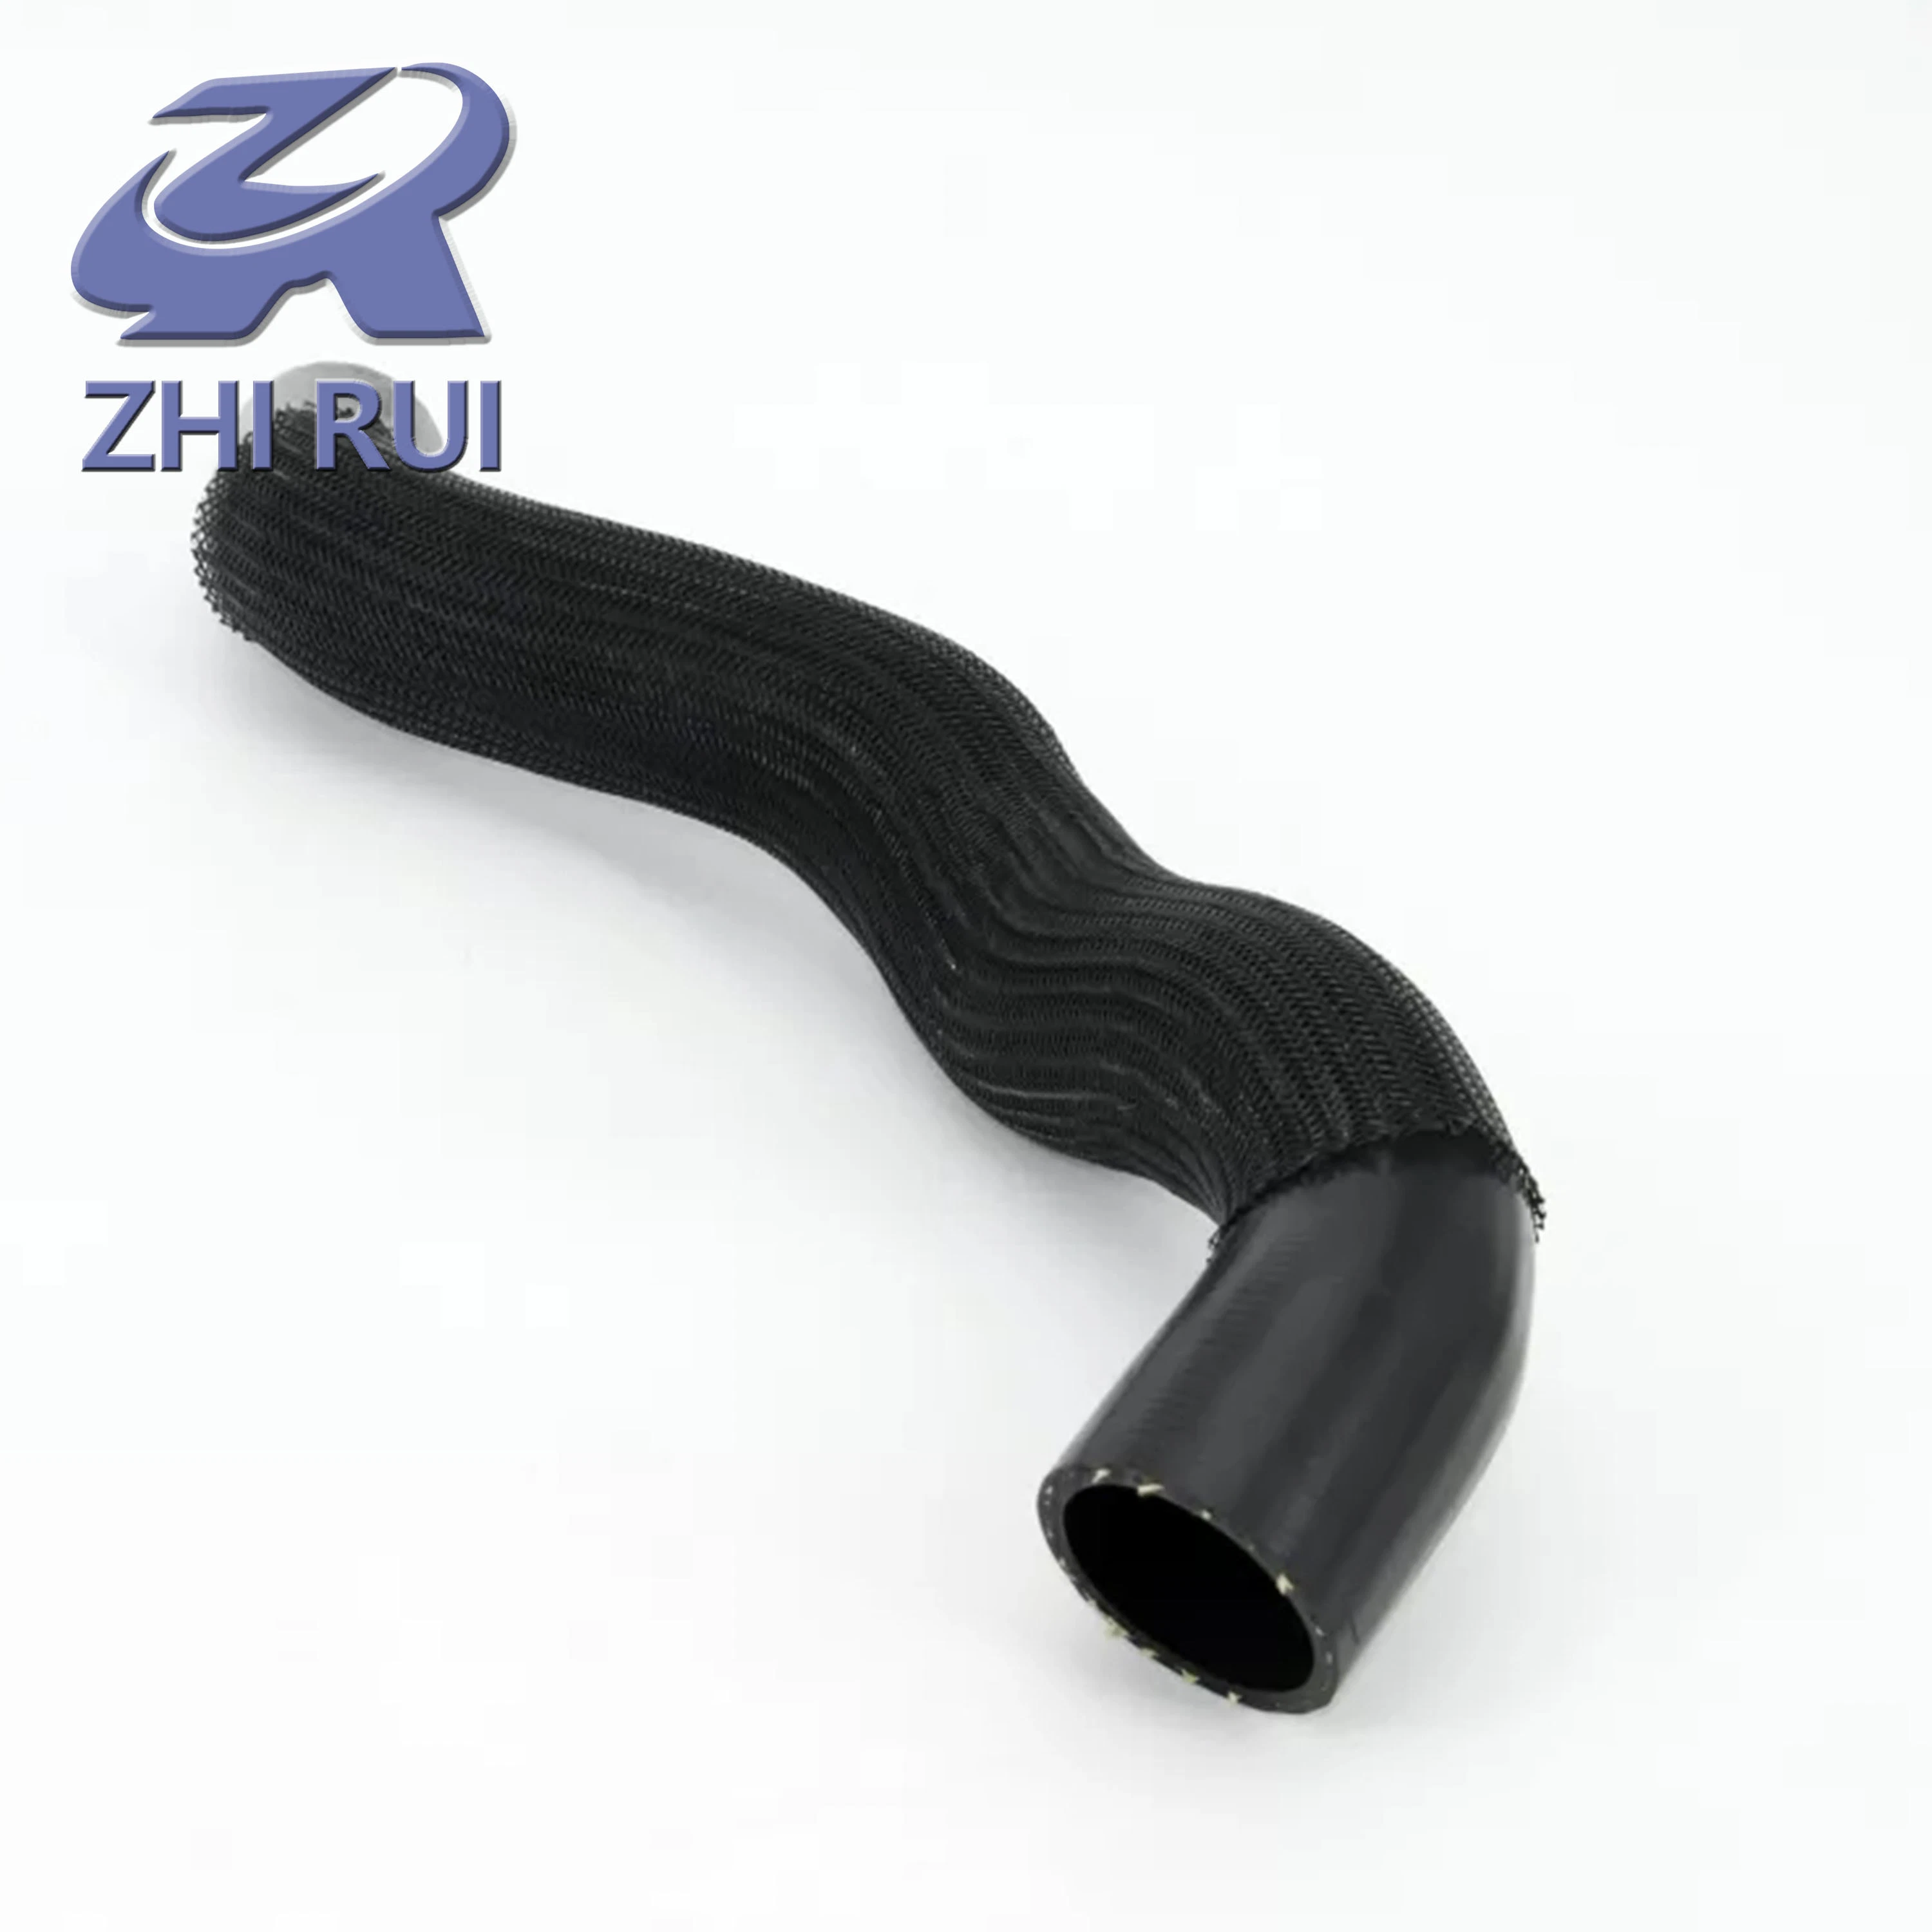 Auto Engine Radiator Coolant Hose Structure Cooling System Water Pipe for Auto Parts Xf 3.0 Sc Xf 3.0 Sc Sport Club OEM C2z23121